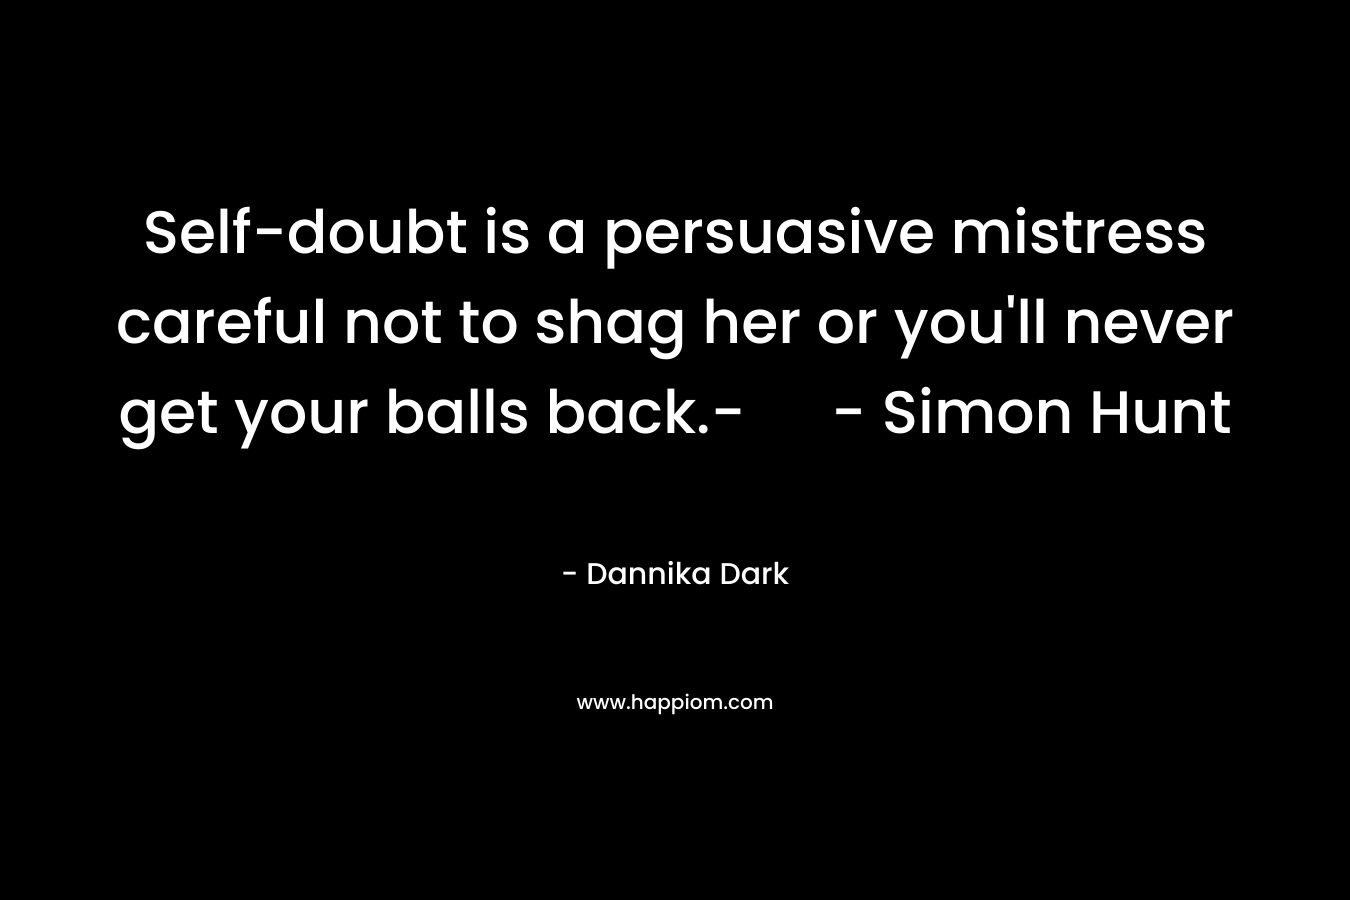 Self-doubt is a persuasive mistress careful not to shag her or you'll never get your balls back.- - Simon Hunt 